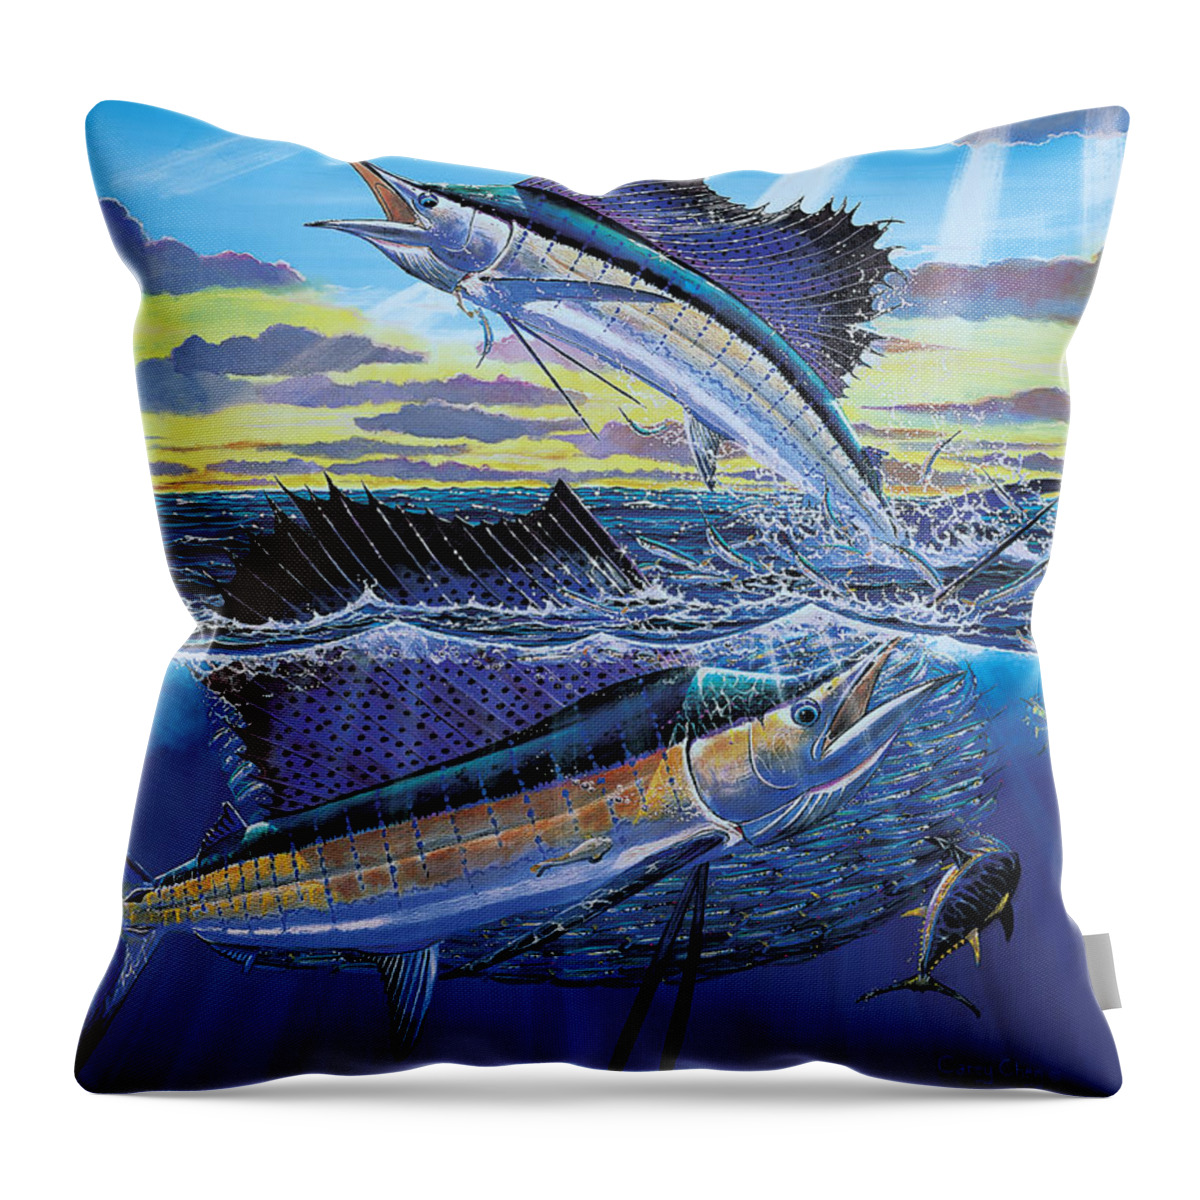 Sailfish Throw Pillow featuring the painting Hot Spot Off0073 by Carey Chen